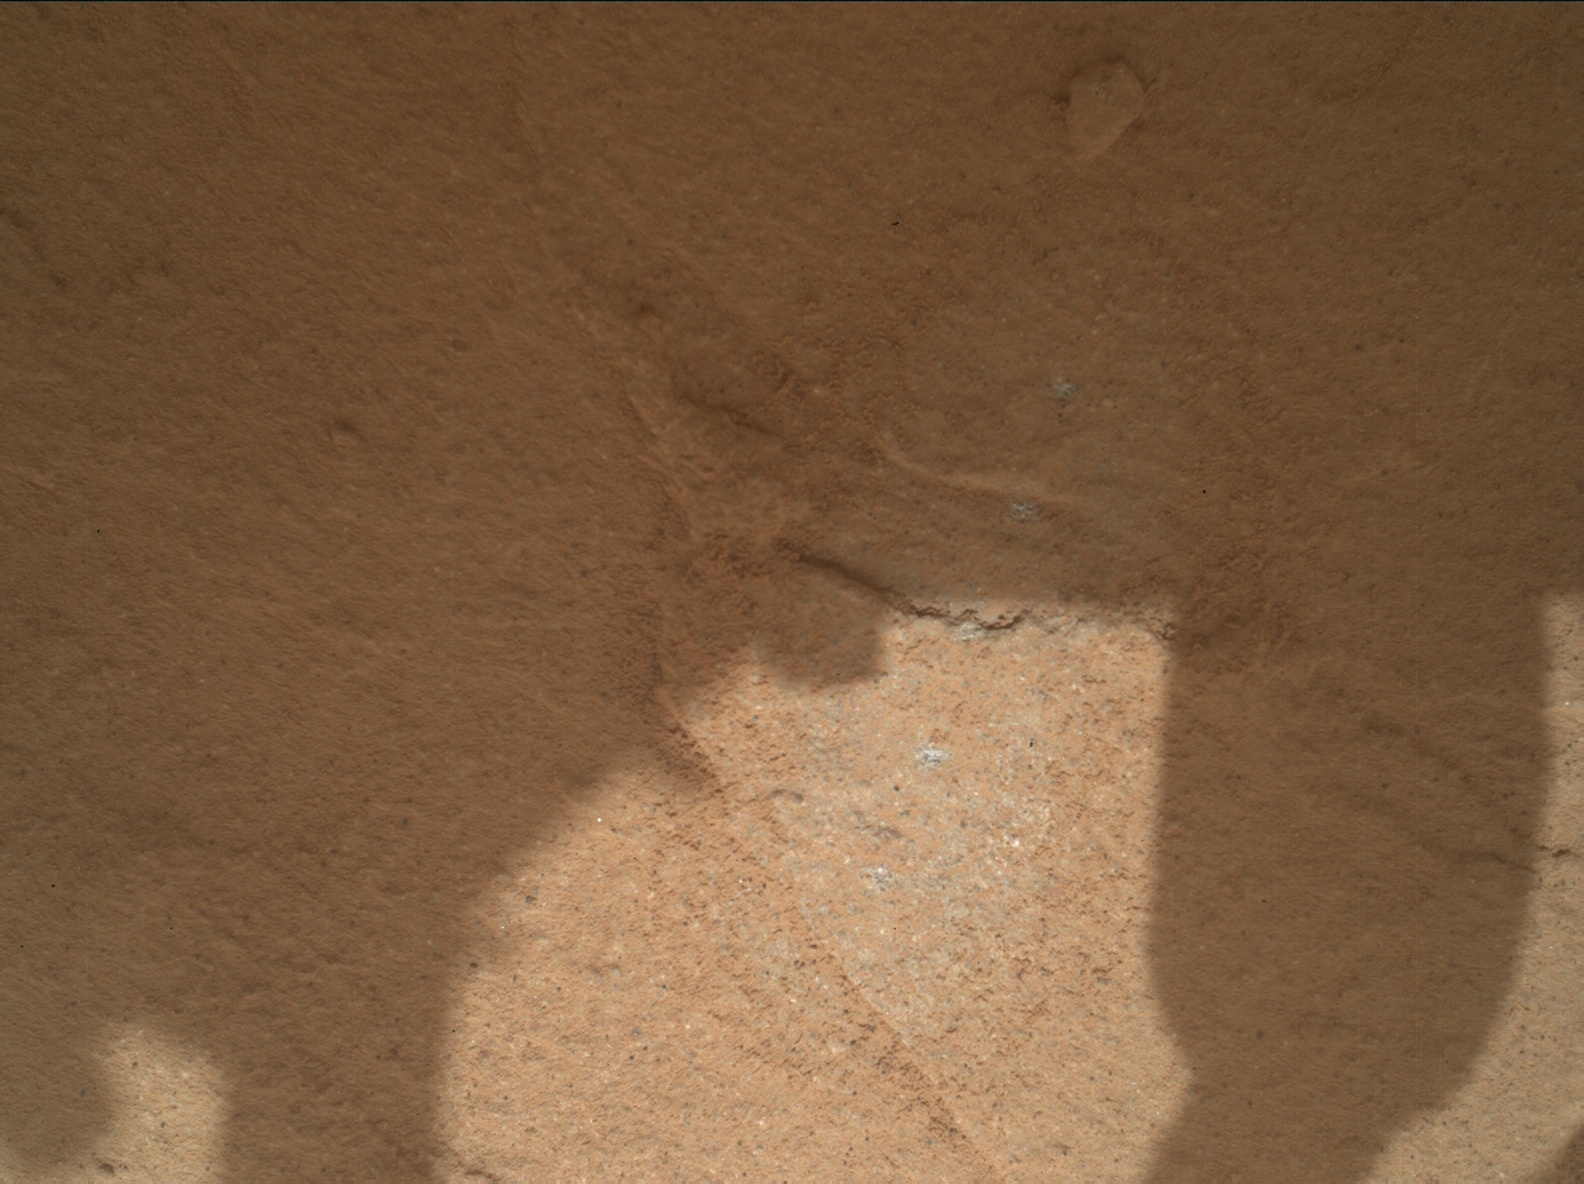 Nasa's Mars rover Curiosity acquired this image using its Mars Hand Lens Imager (MAHLI) on Sol 3531